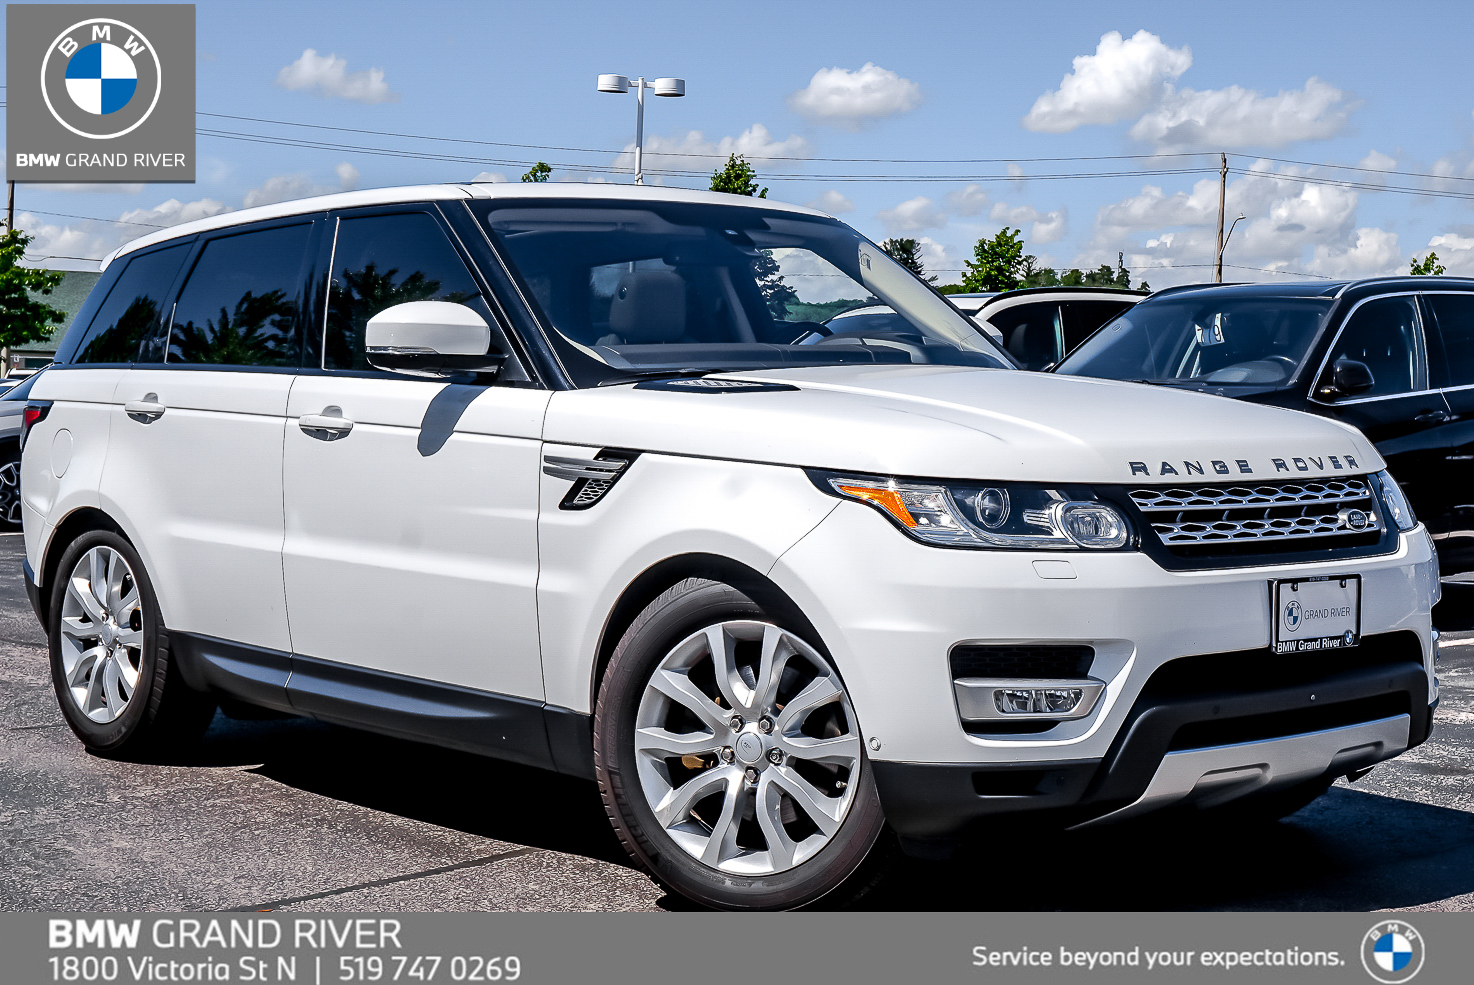 2016 Land Rover Range Rover Sport JUST ARRIVED | PICTURES TO COME SOON |